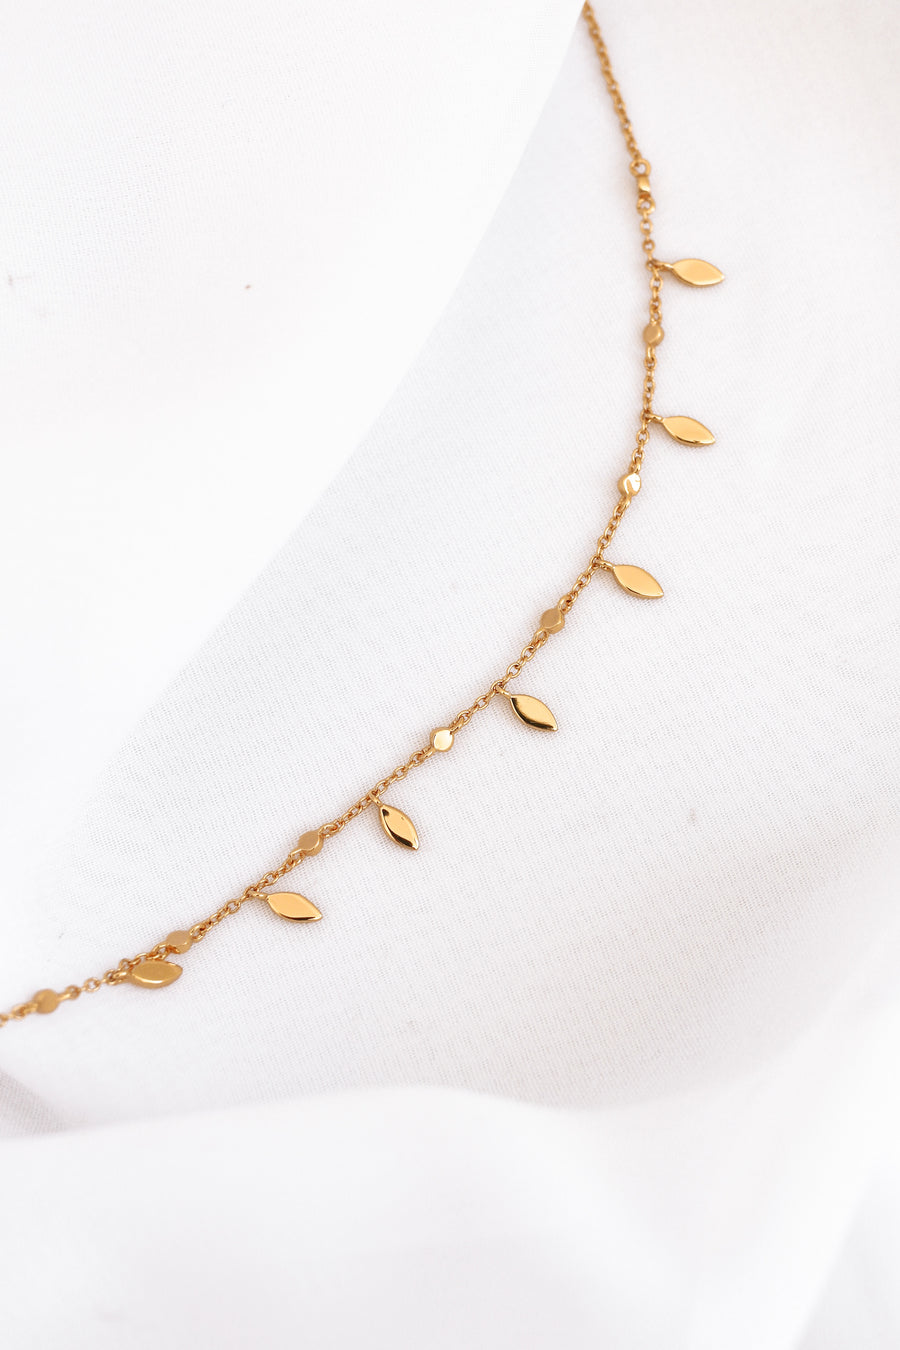 Lani - Gold or Silver Stainless Steel Anklet